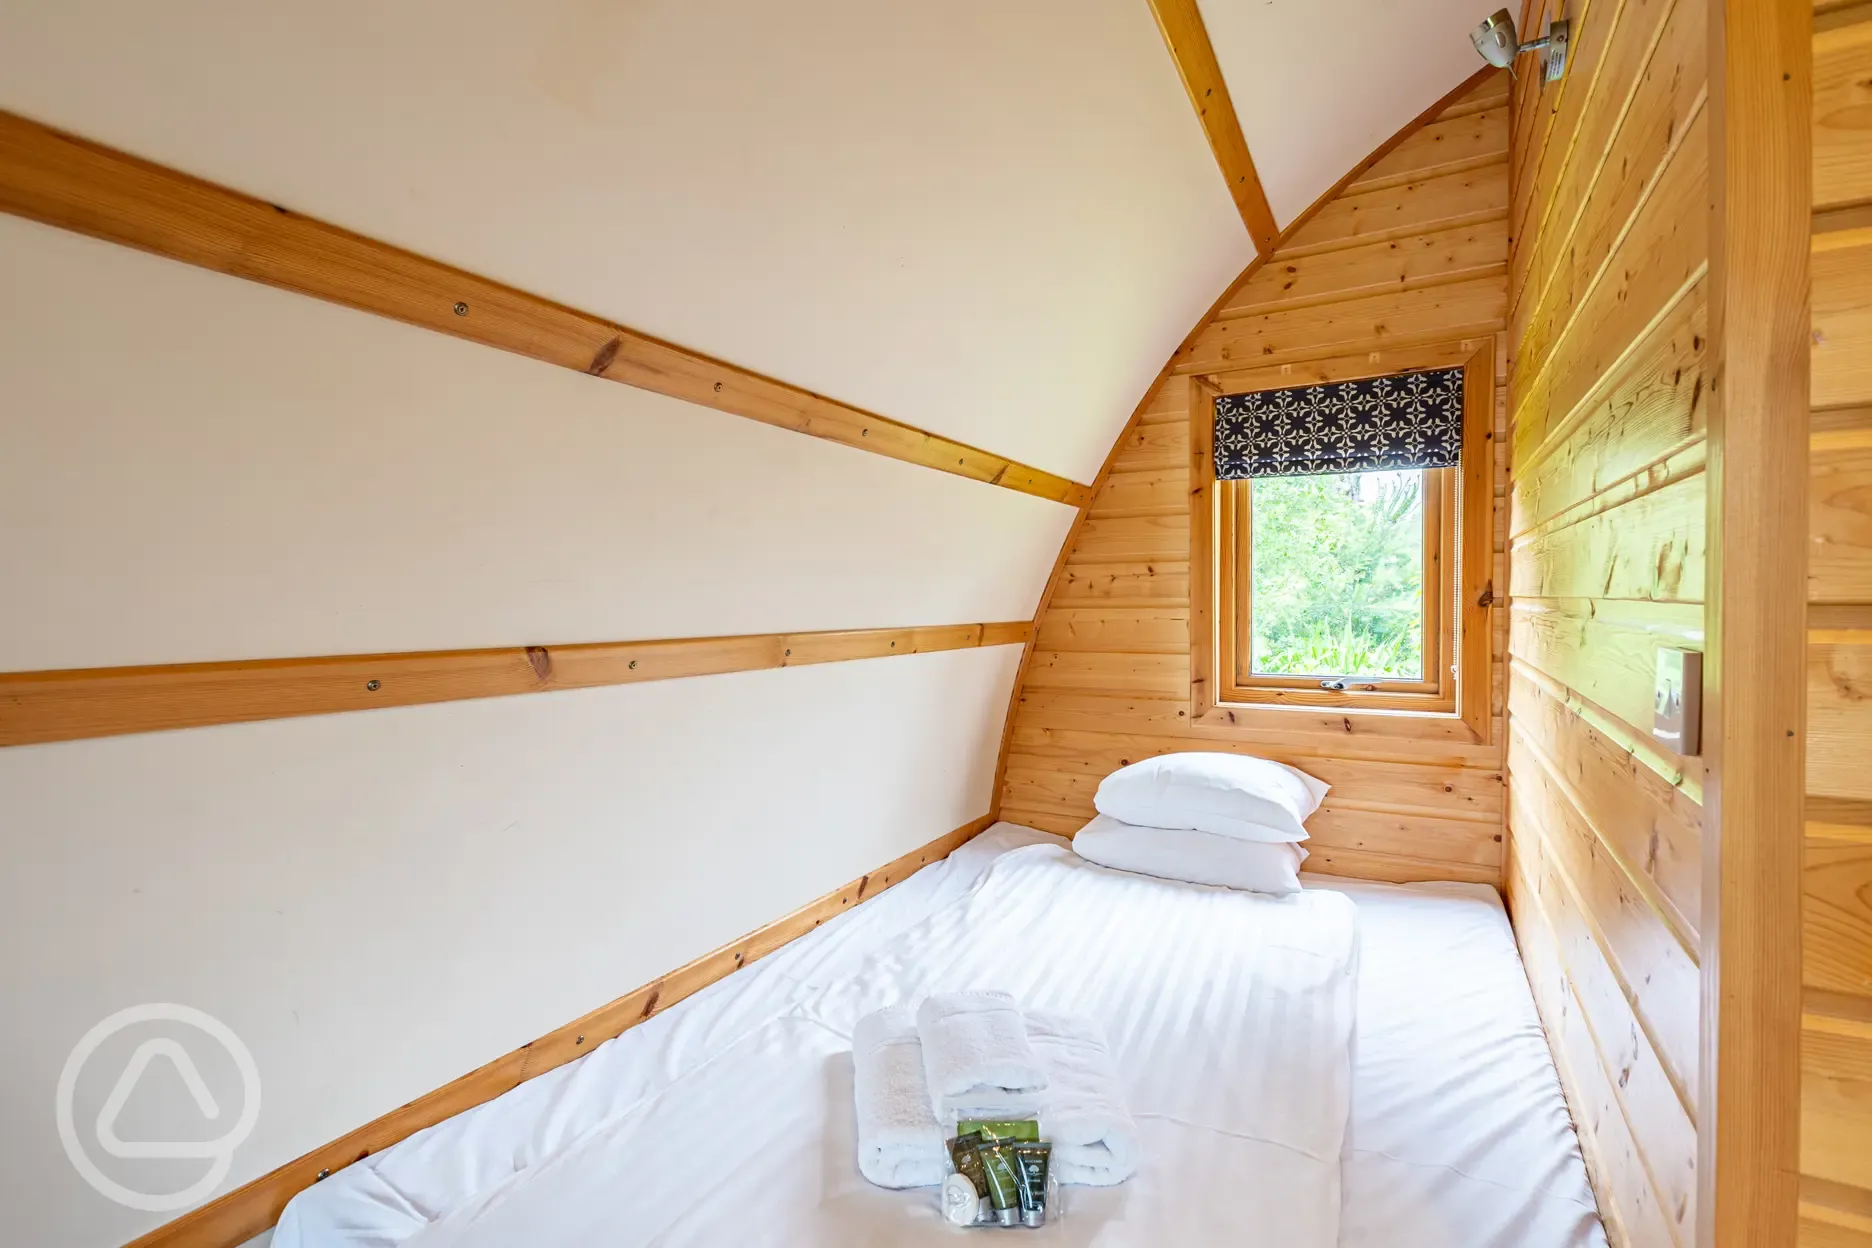 Four person glamping pod double bed